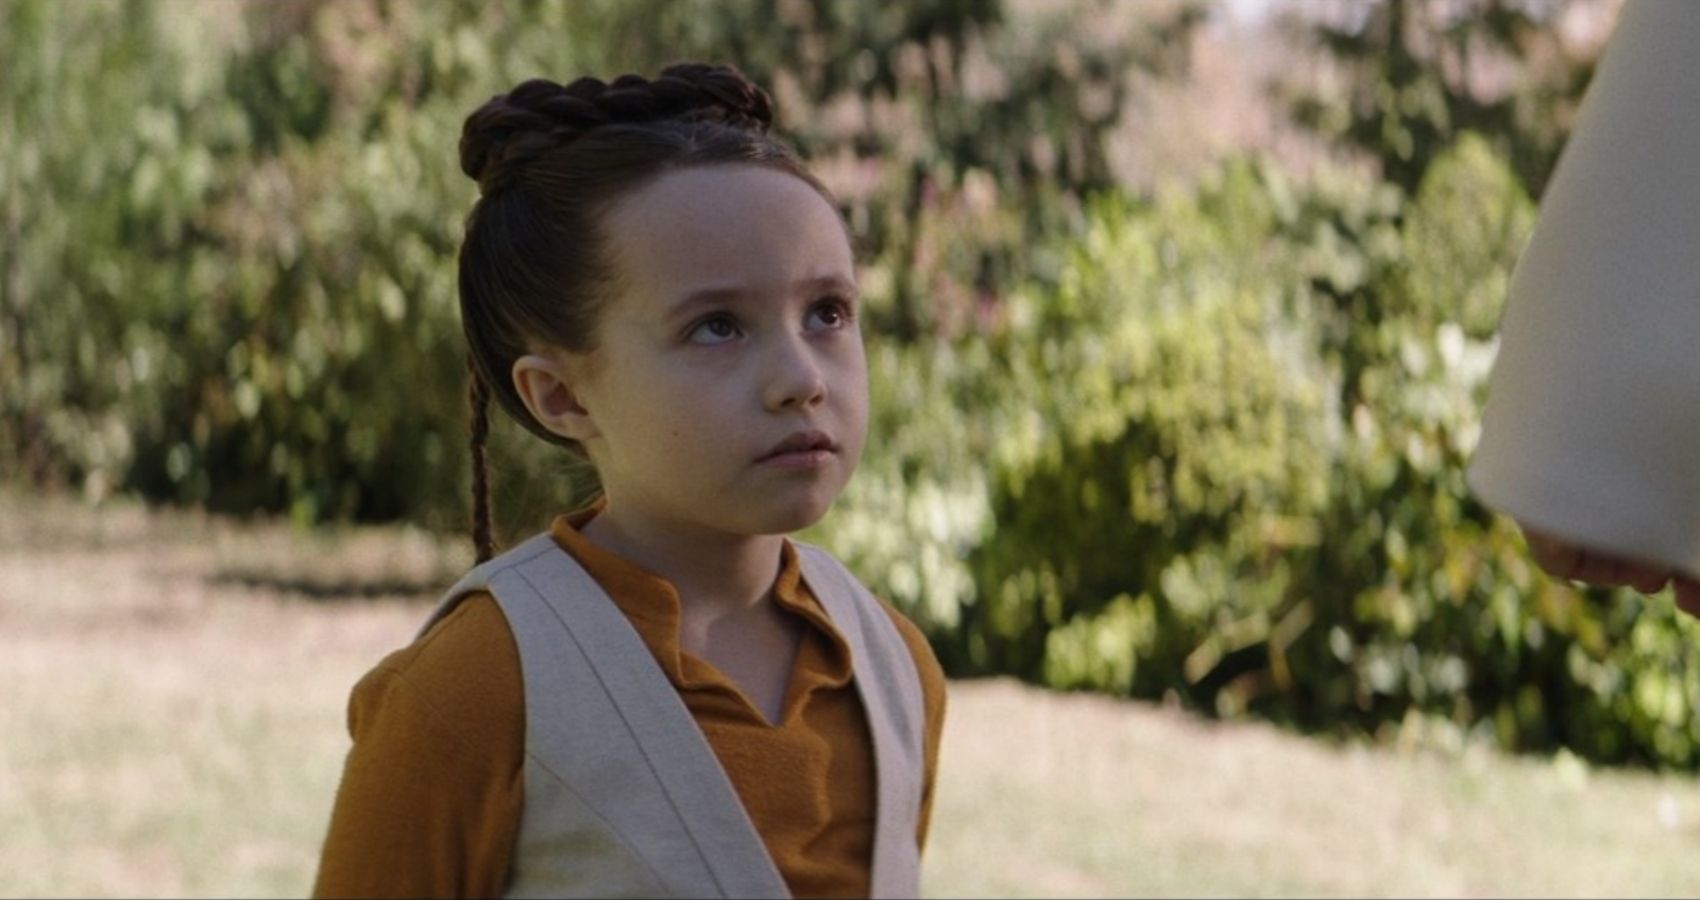 #Why Young Princess Leia’s Introduction is Important for Star Wars Fans